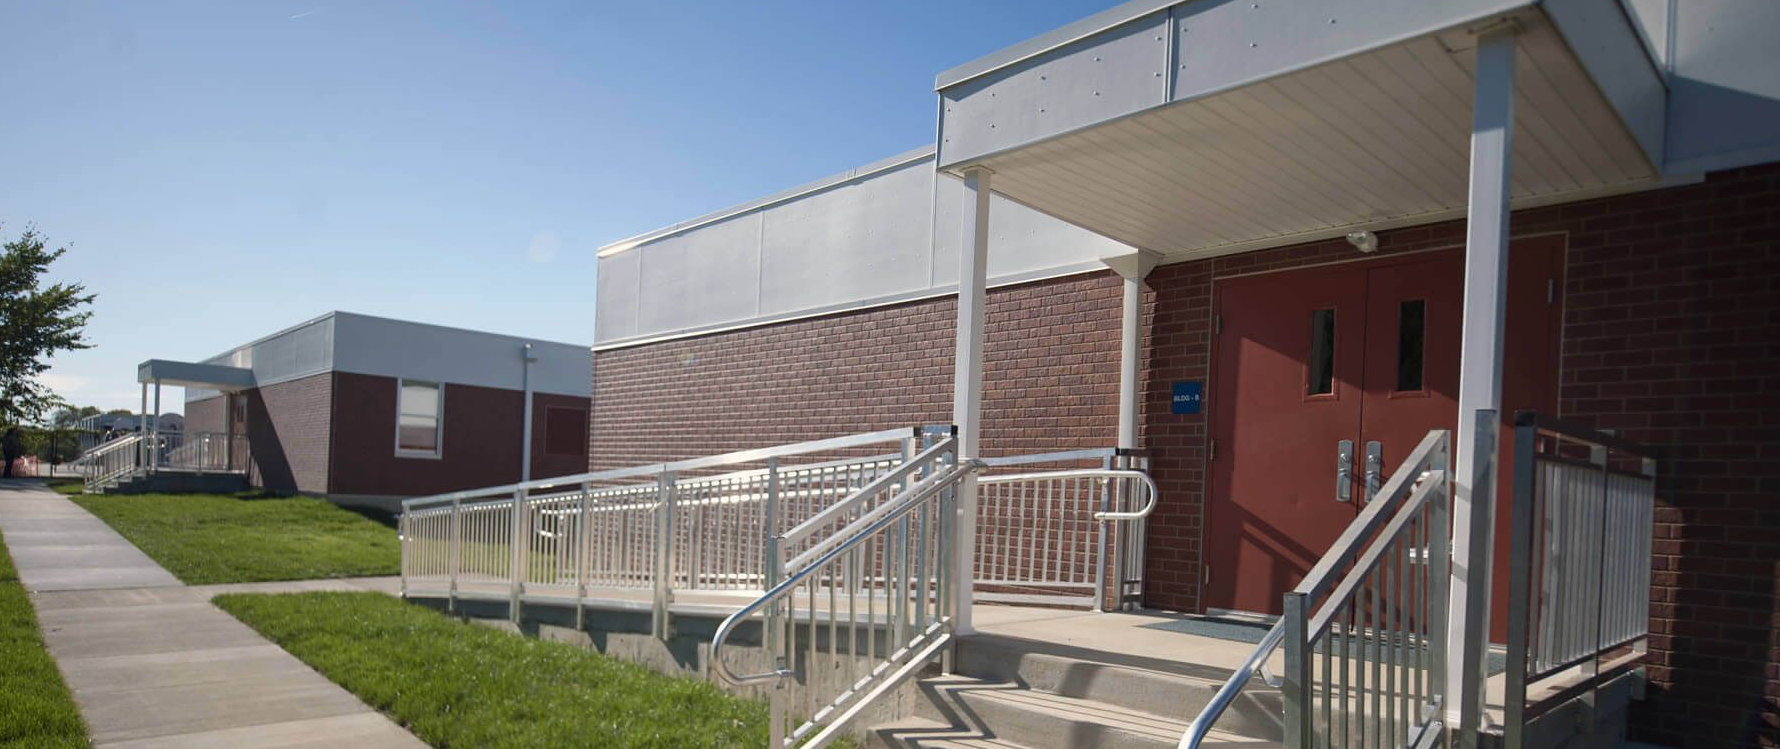 Modular Buildings for Schools in Baltimore County, MD